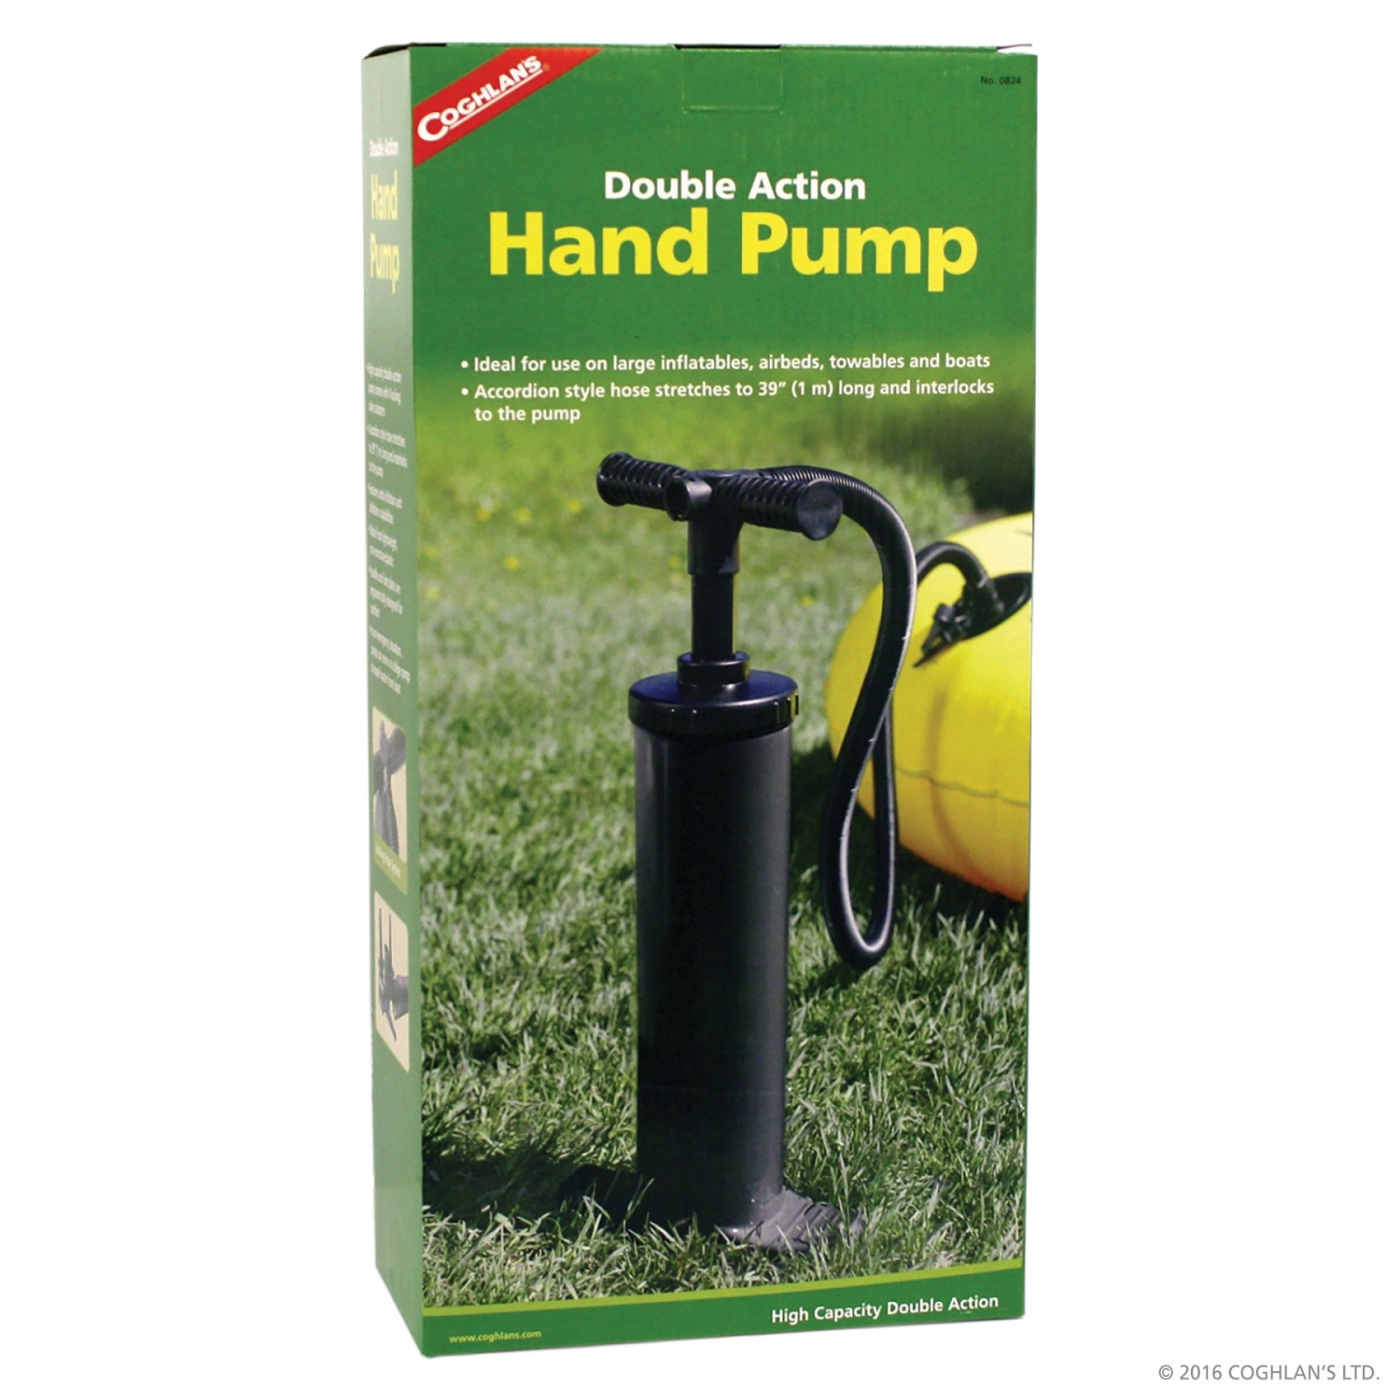 DOUBLE ACTION HAND PUMP